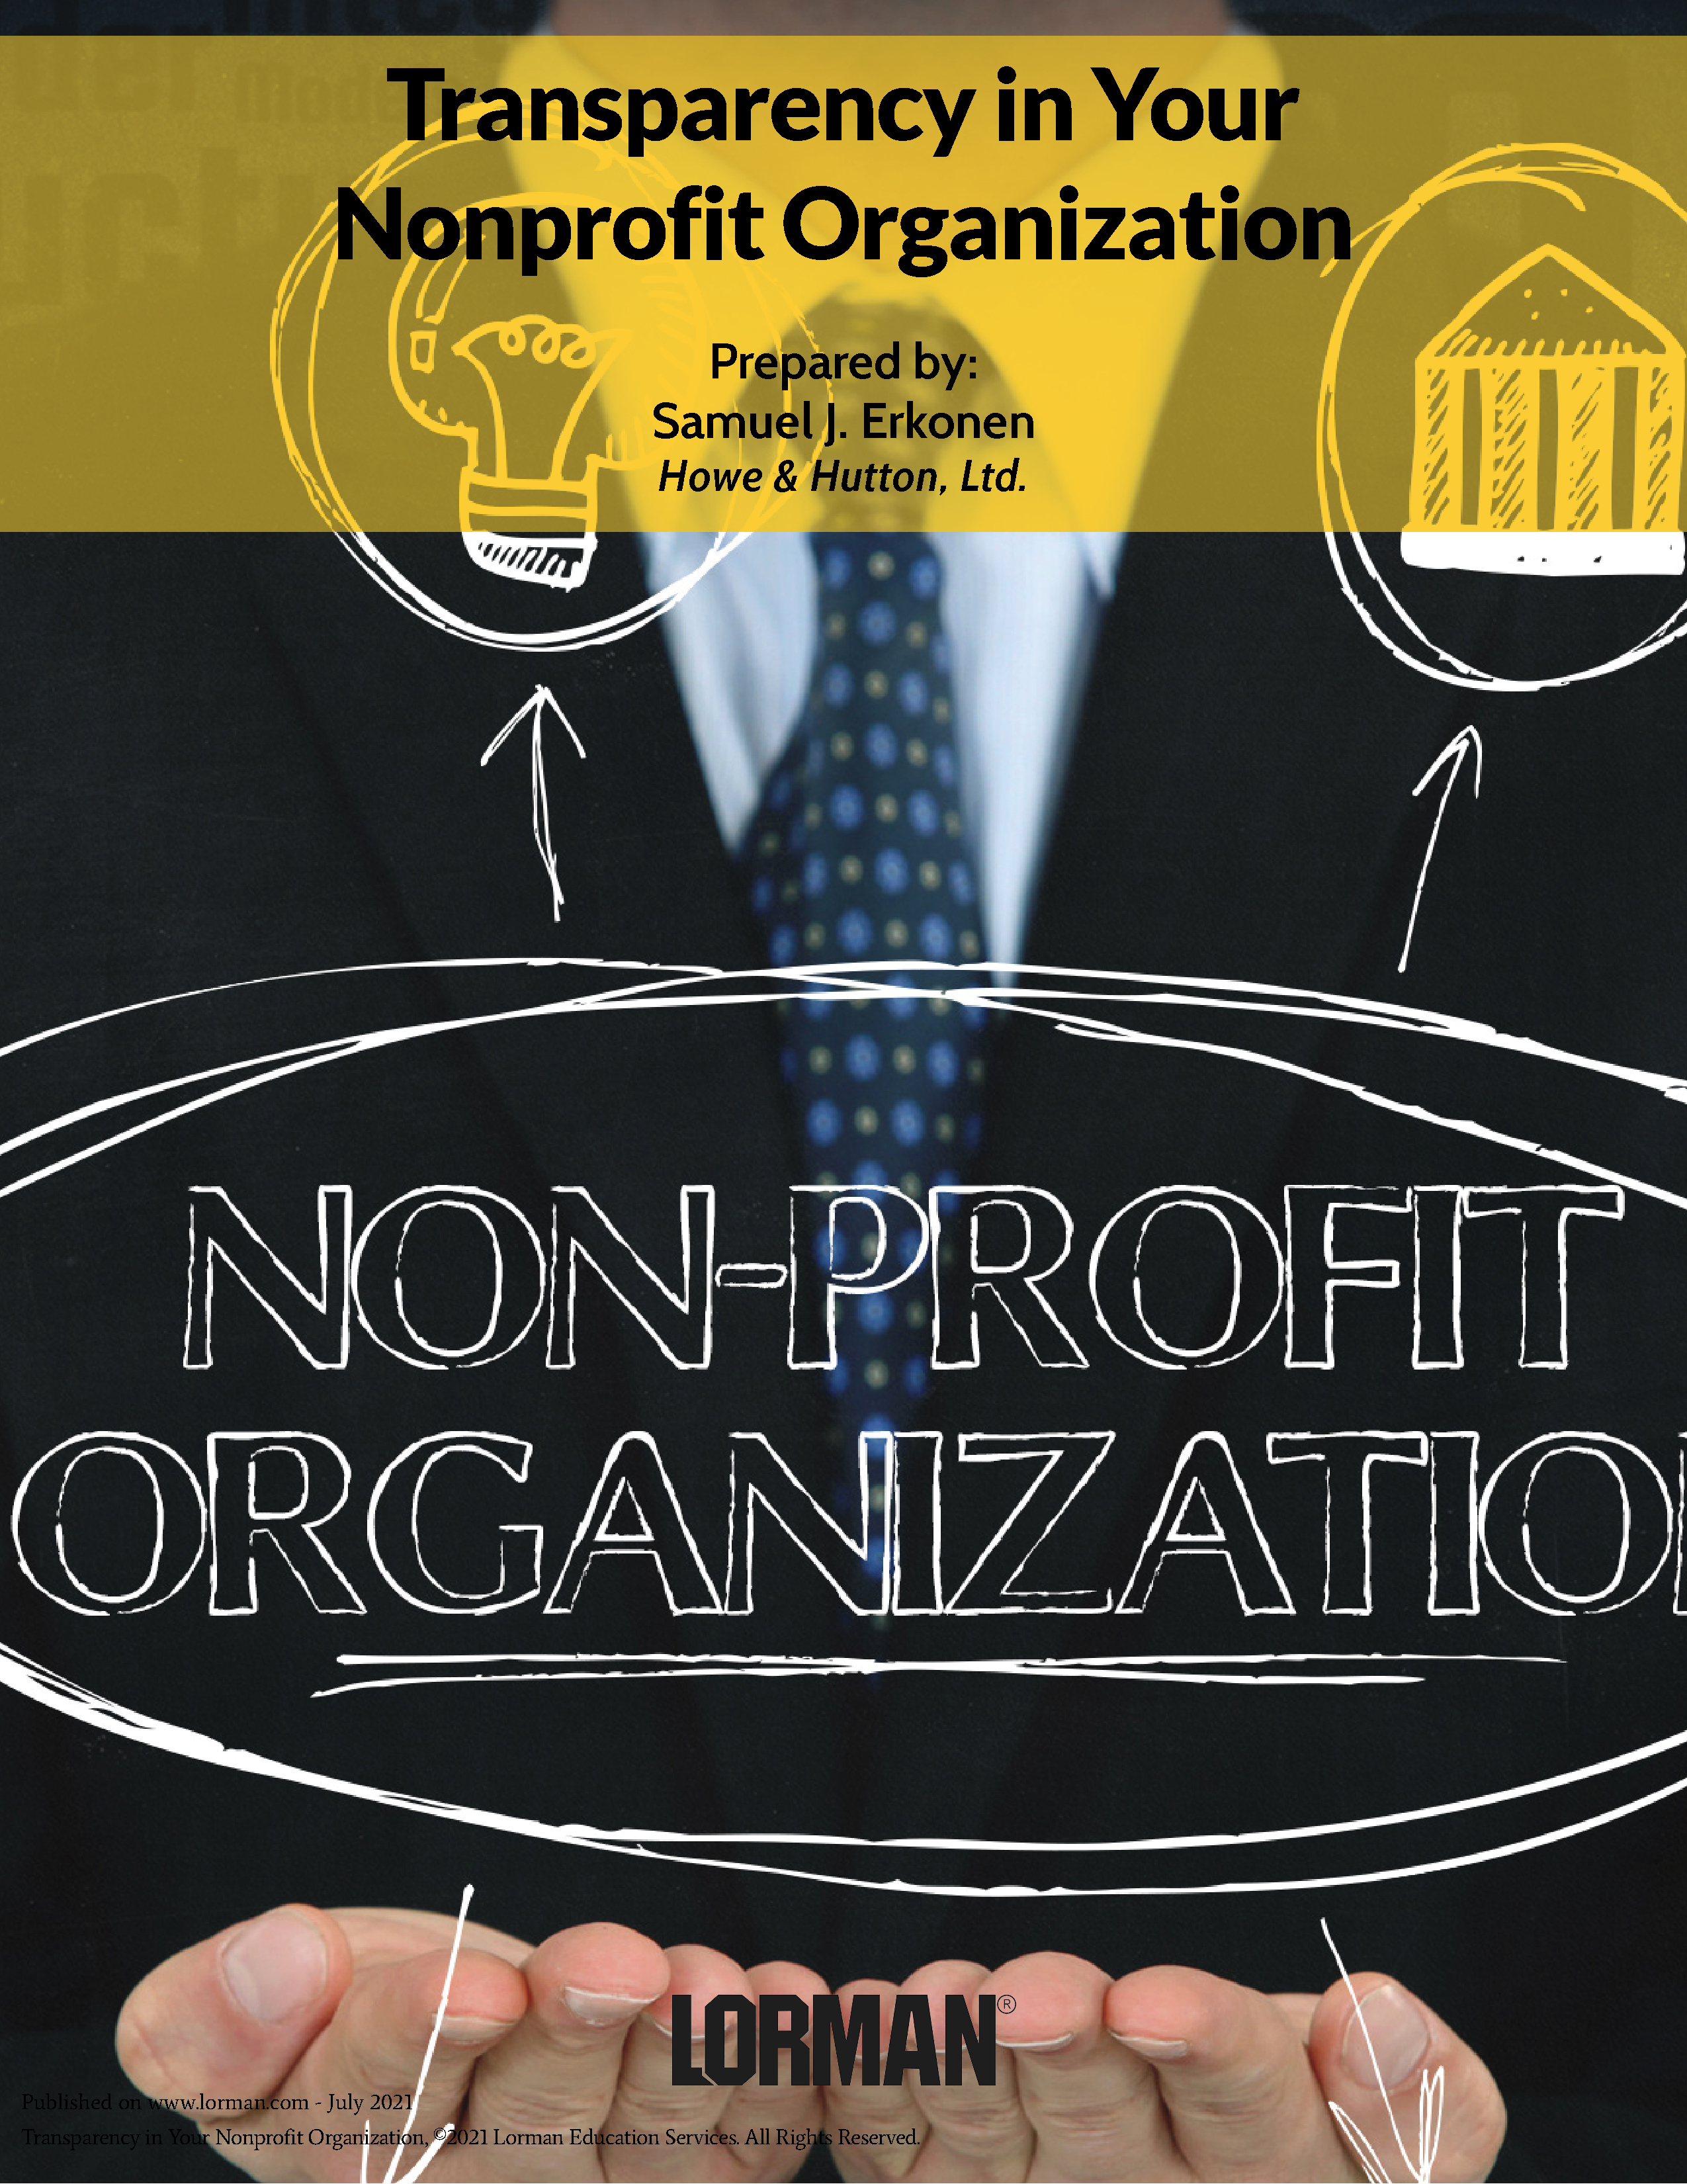 Transparency in Your Nonprofit Organization